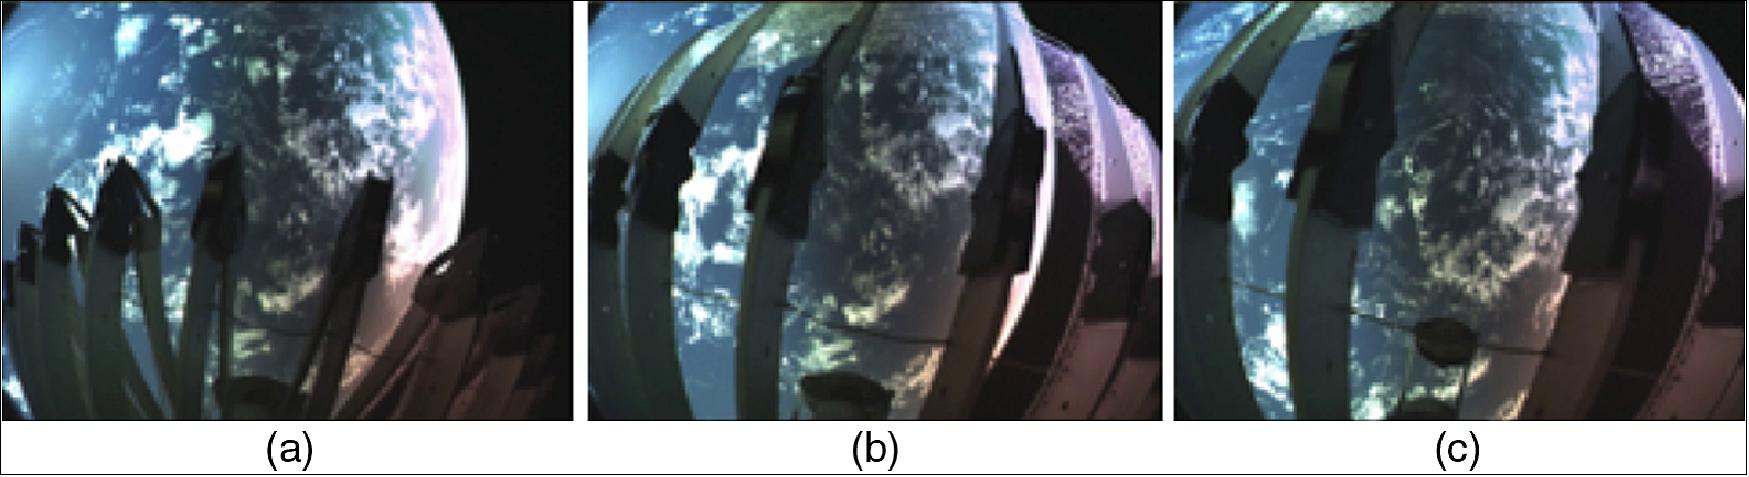 Figure 14: On-orbit pictures captured during the 3-minute deployment sequence: (a) the ribs unfurl as the antenna is nearly extended, (b) ribs open, and (c) final dish shape tensioning and subreflector separation (image credit: NASA/JPL Team)